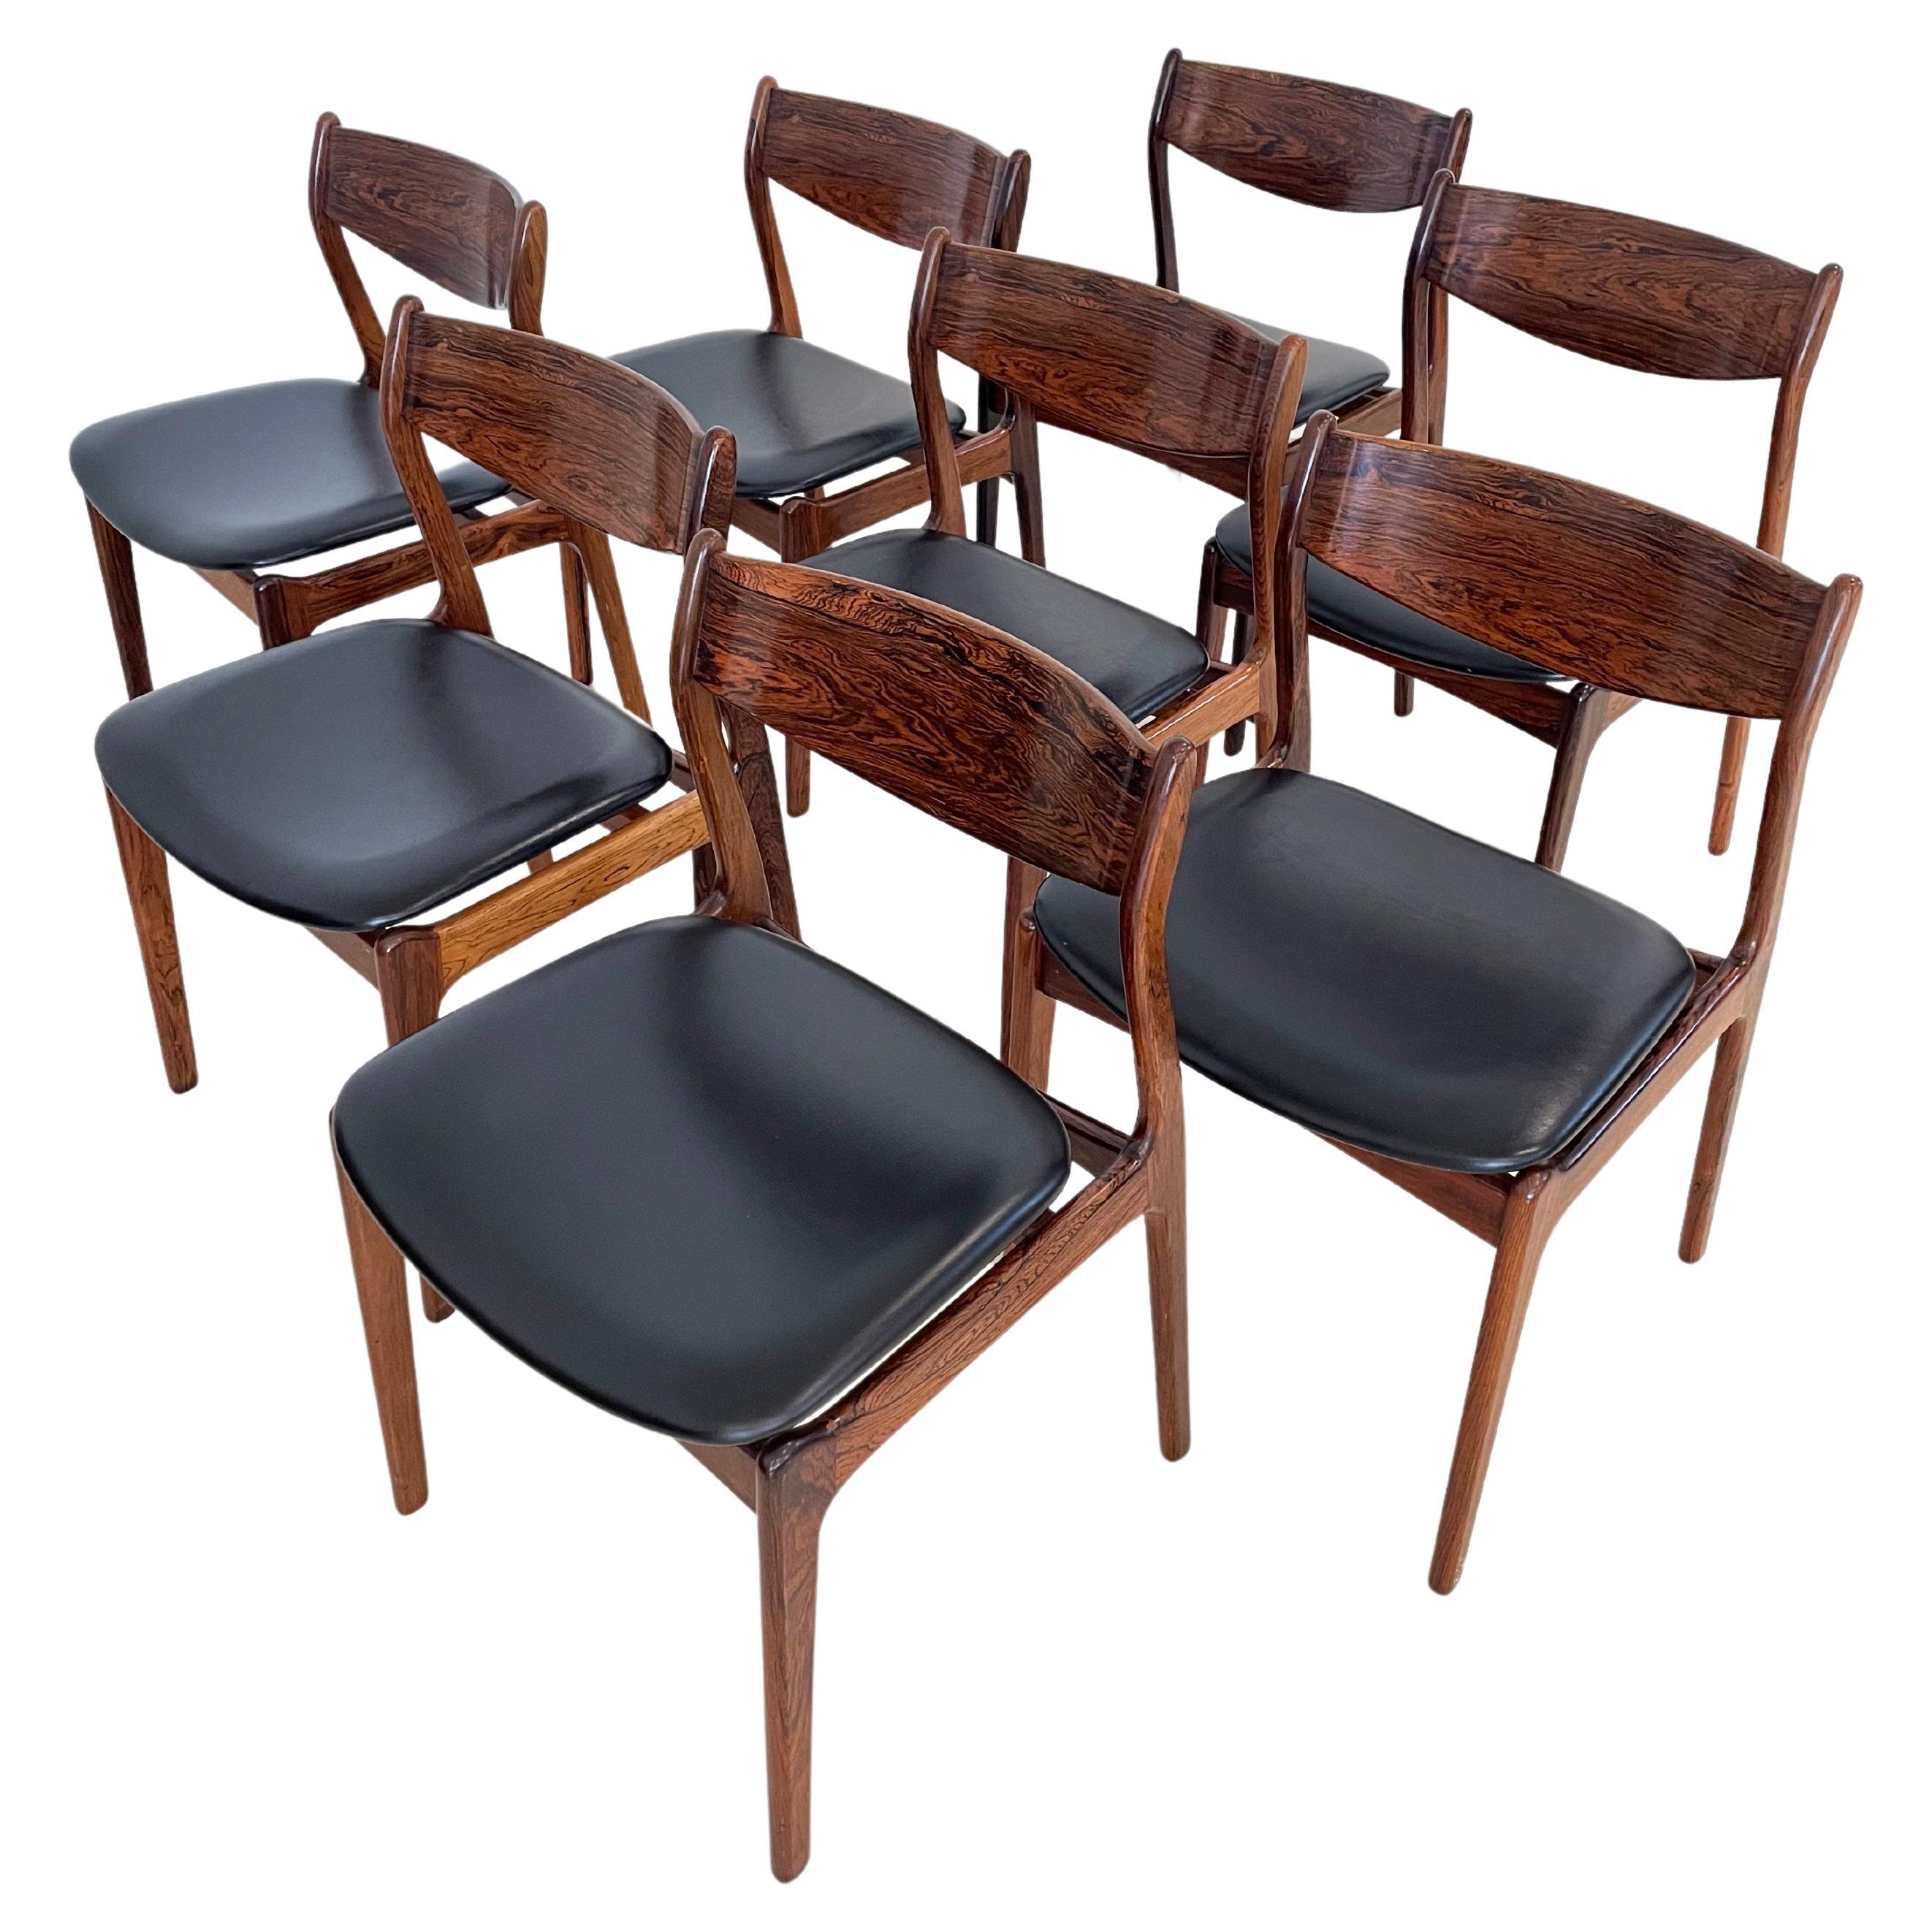 Vintage Mid-century Danish Dining Chairs, Designed by P.E. Jorgensen, Set of 8 For Sale